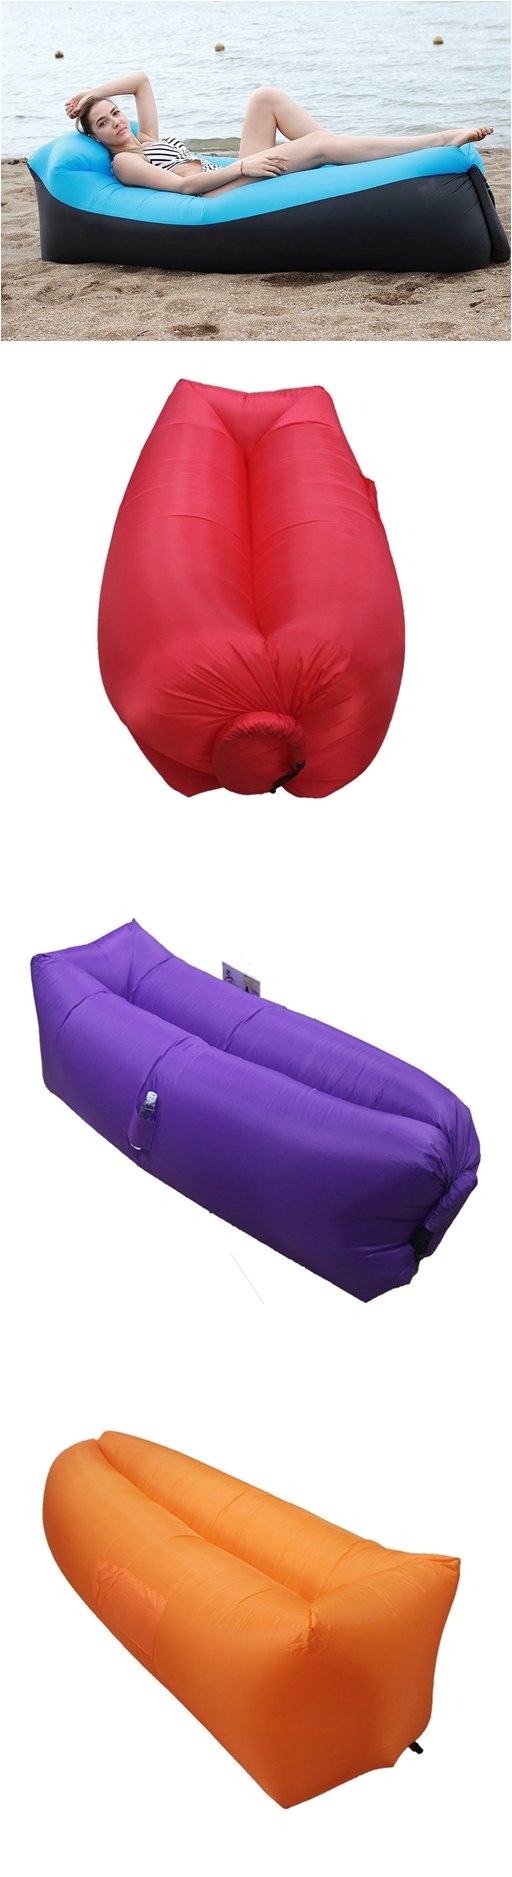 outdoor inflatable lounger inflatable couch air lounger air chair lounger air sofa blow up air couch